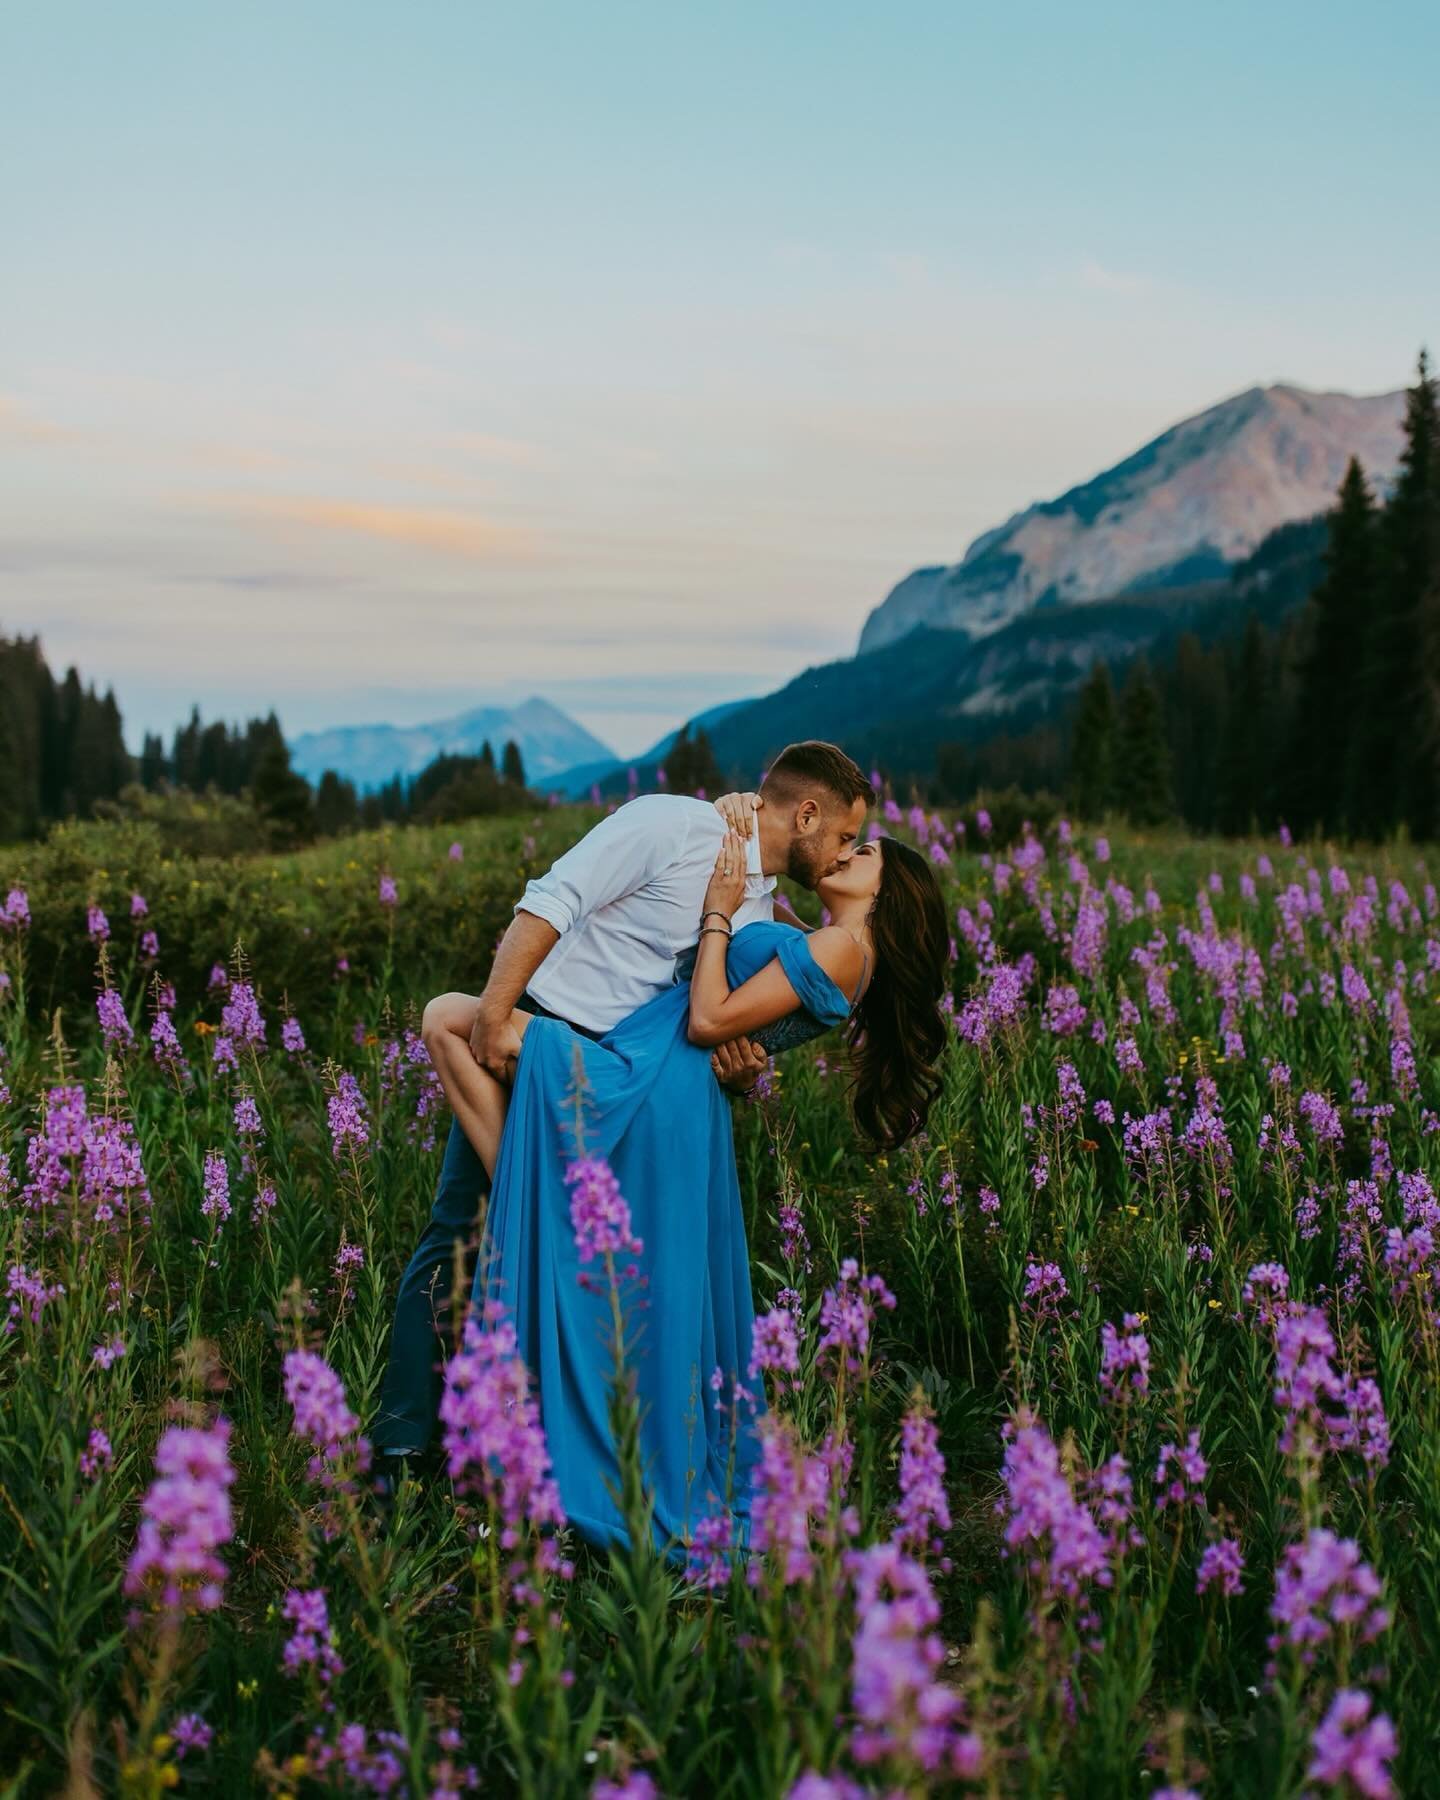 💐 2024 WILDFLOWER SEASON 💐

Are you wanting to be surrounded by gorgeous colorful blooms on your elopement day? Here&rsquo;s some tricks to getting the timing right so you can experience the super bloom this year!

BEST TIME OF YEAR:
The wildflower